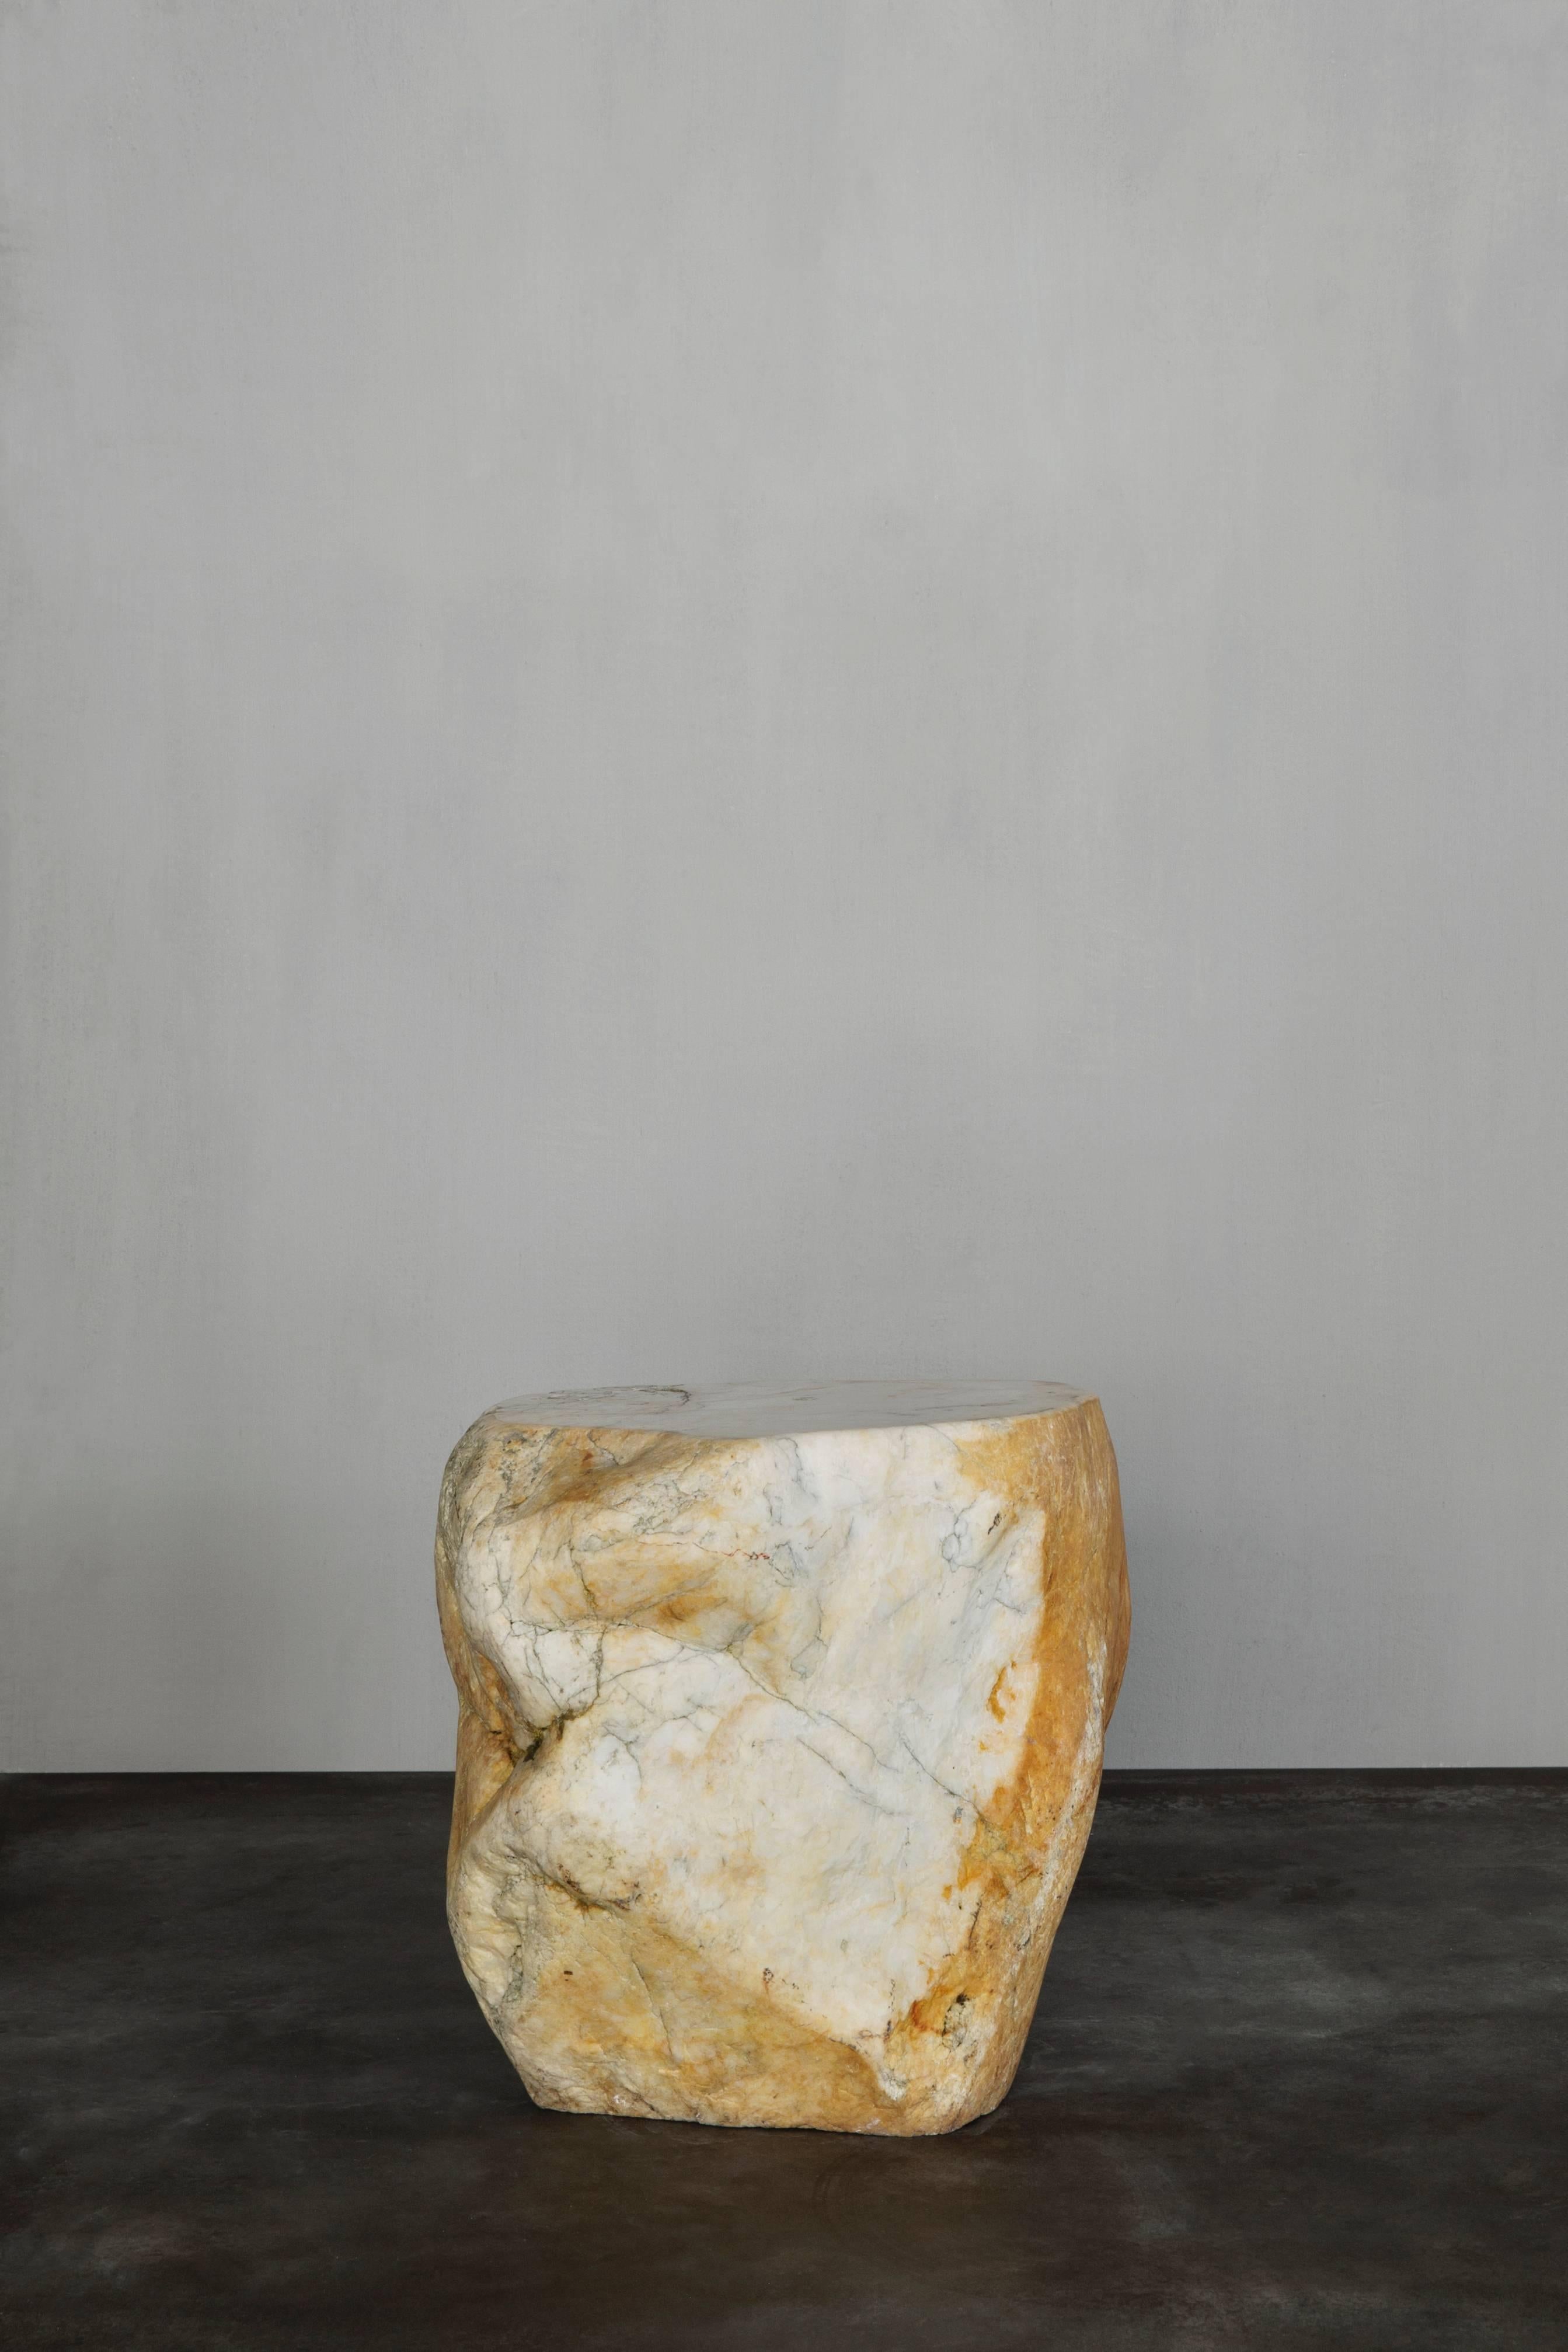 Beautiful stool in white Japanese marble.